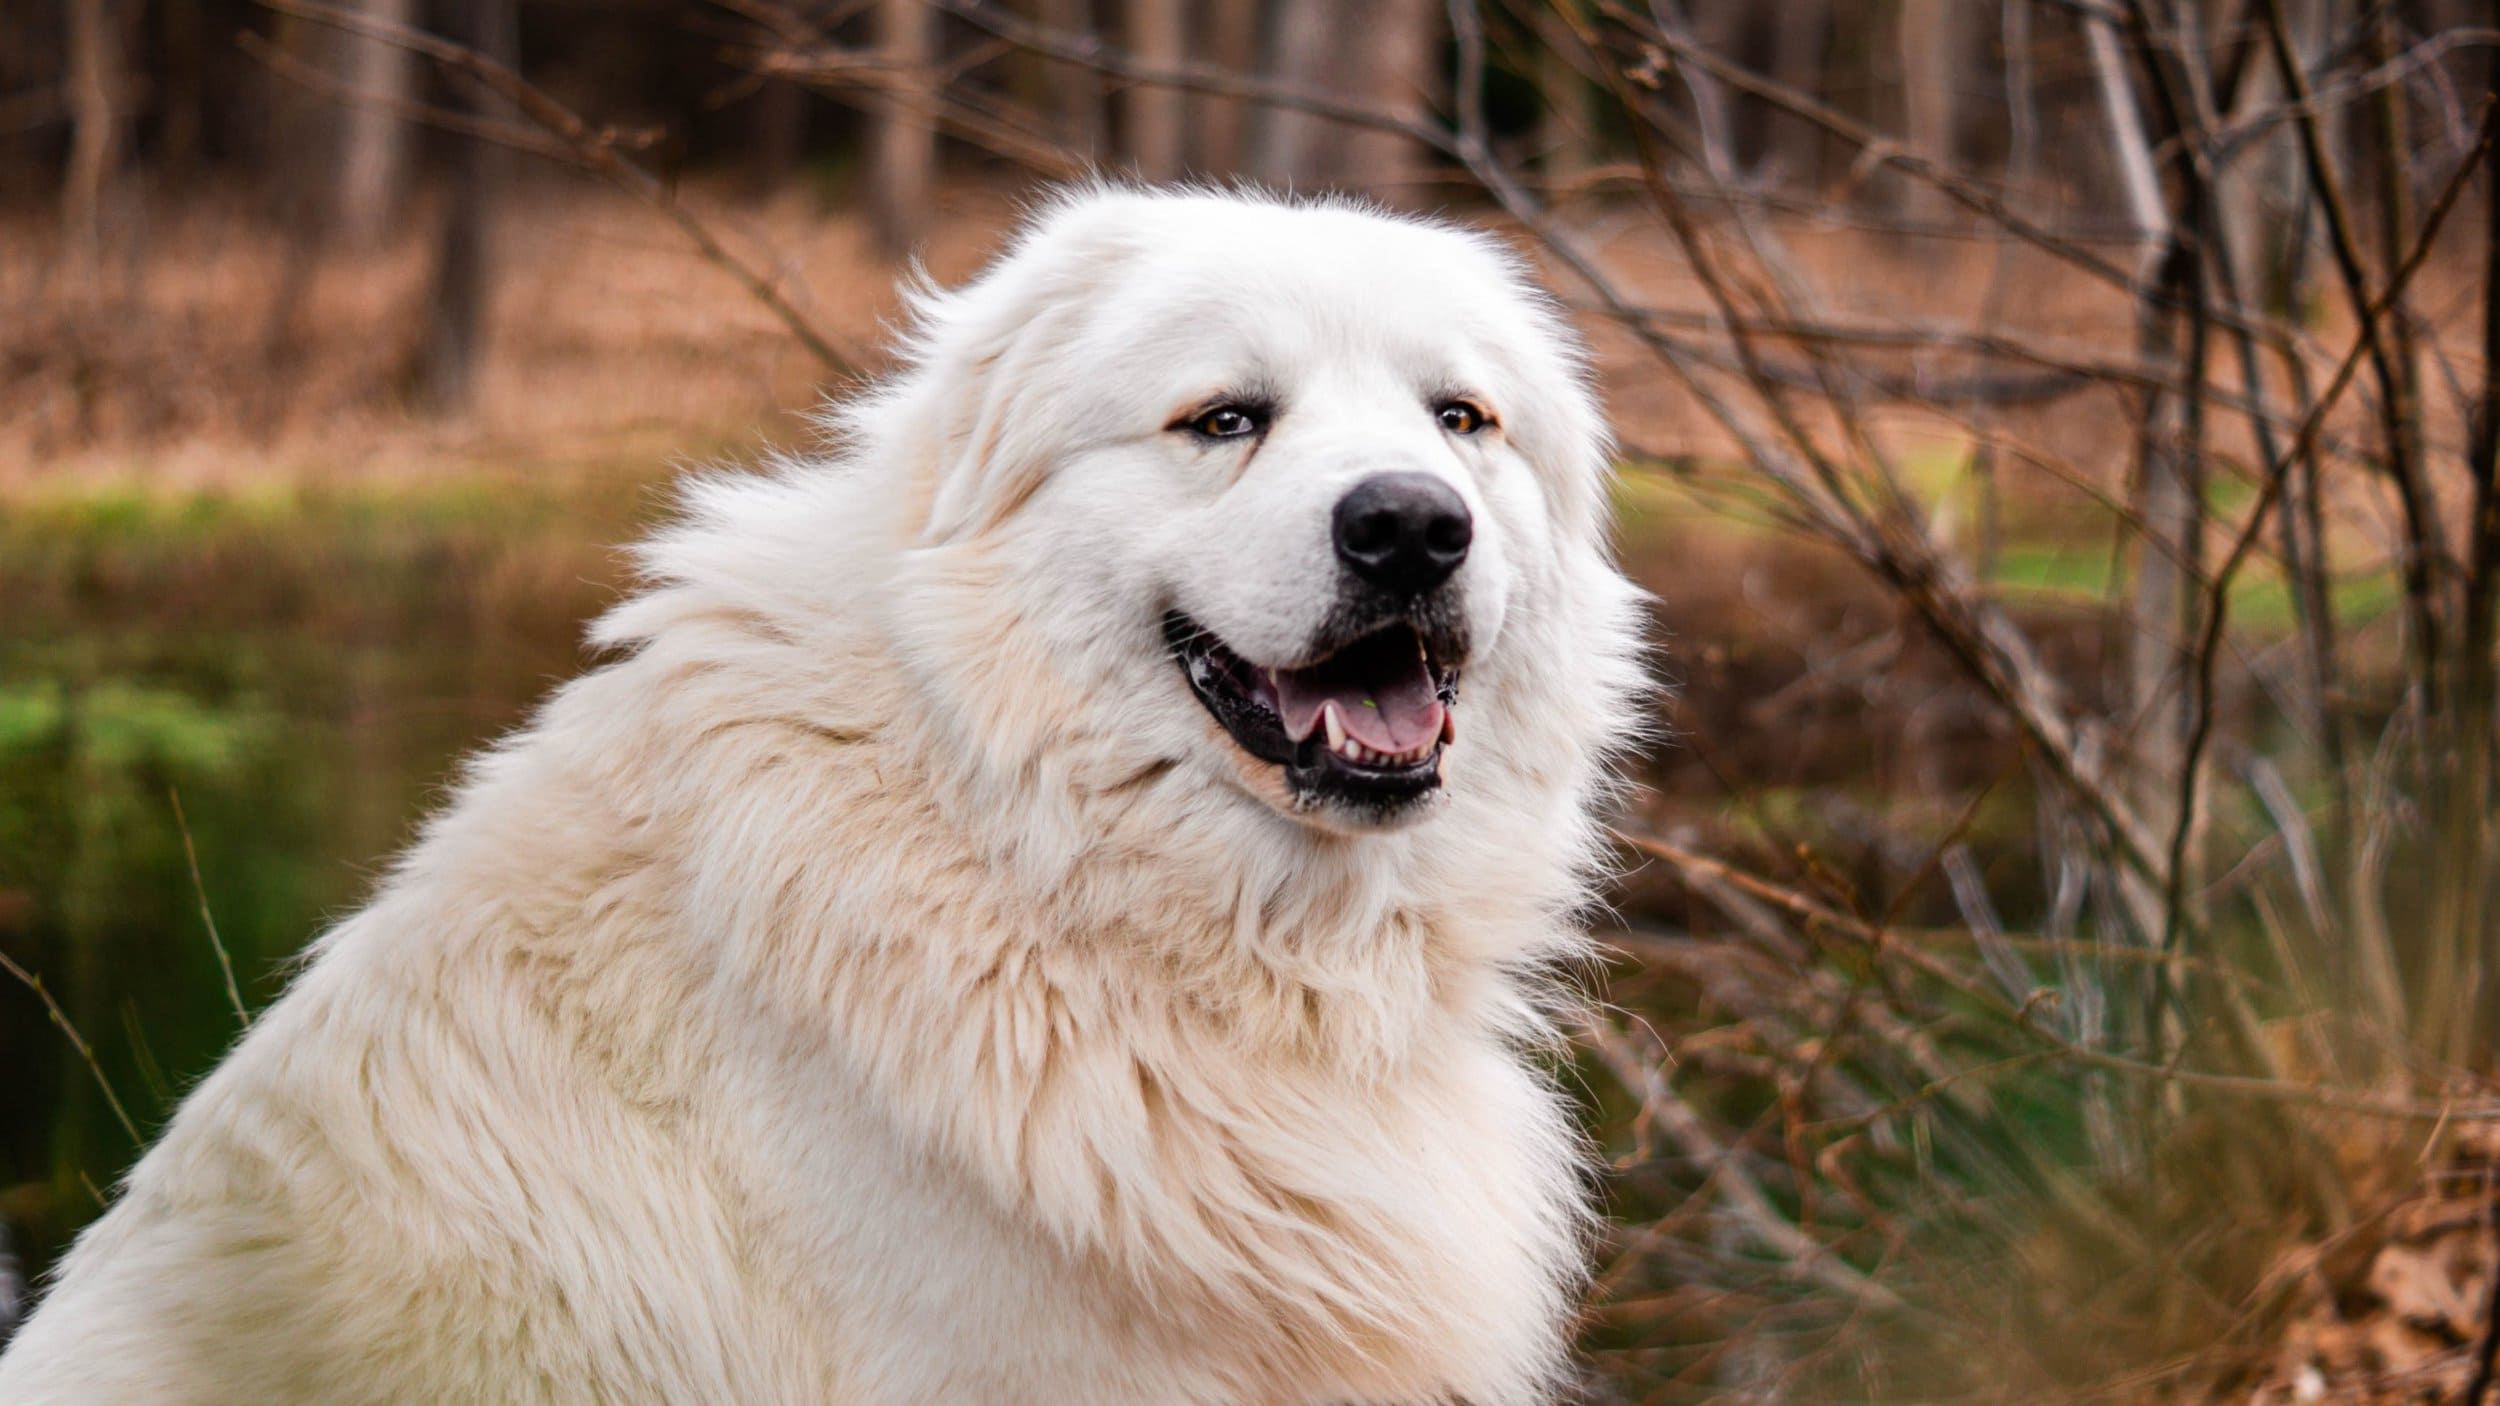 PyrPaw Rescue Great Pyrenees dog